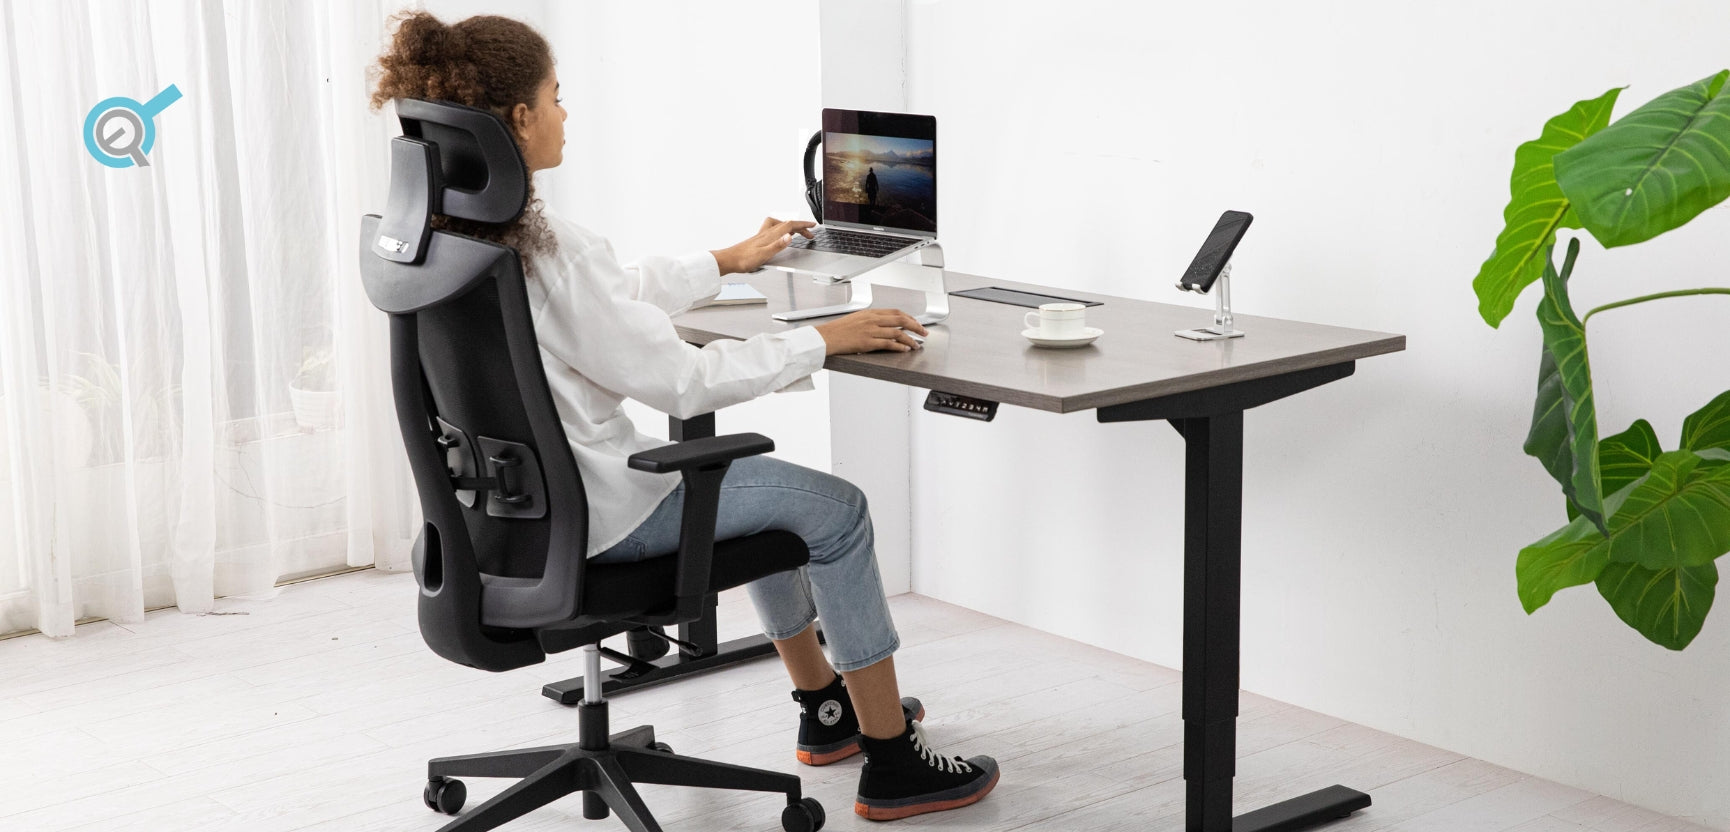  Working Sitting or Standing?